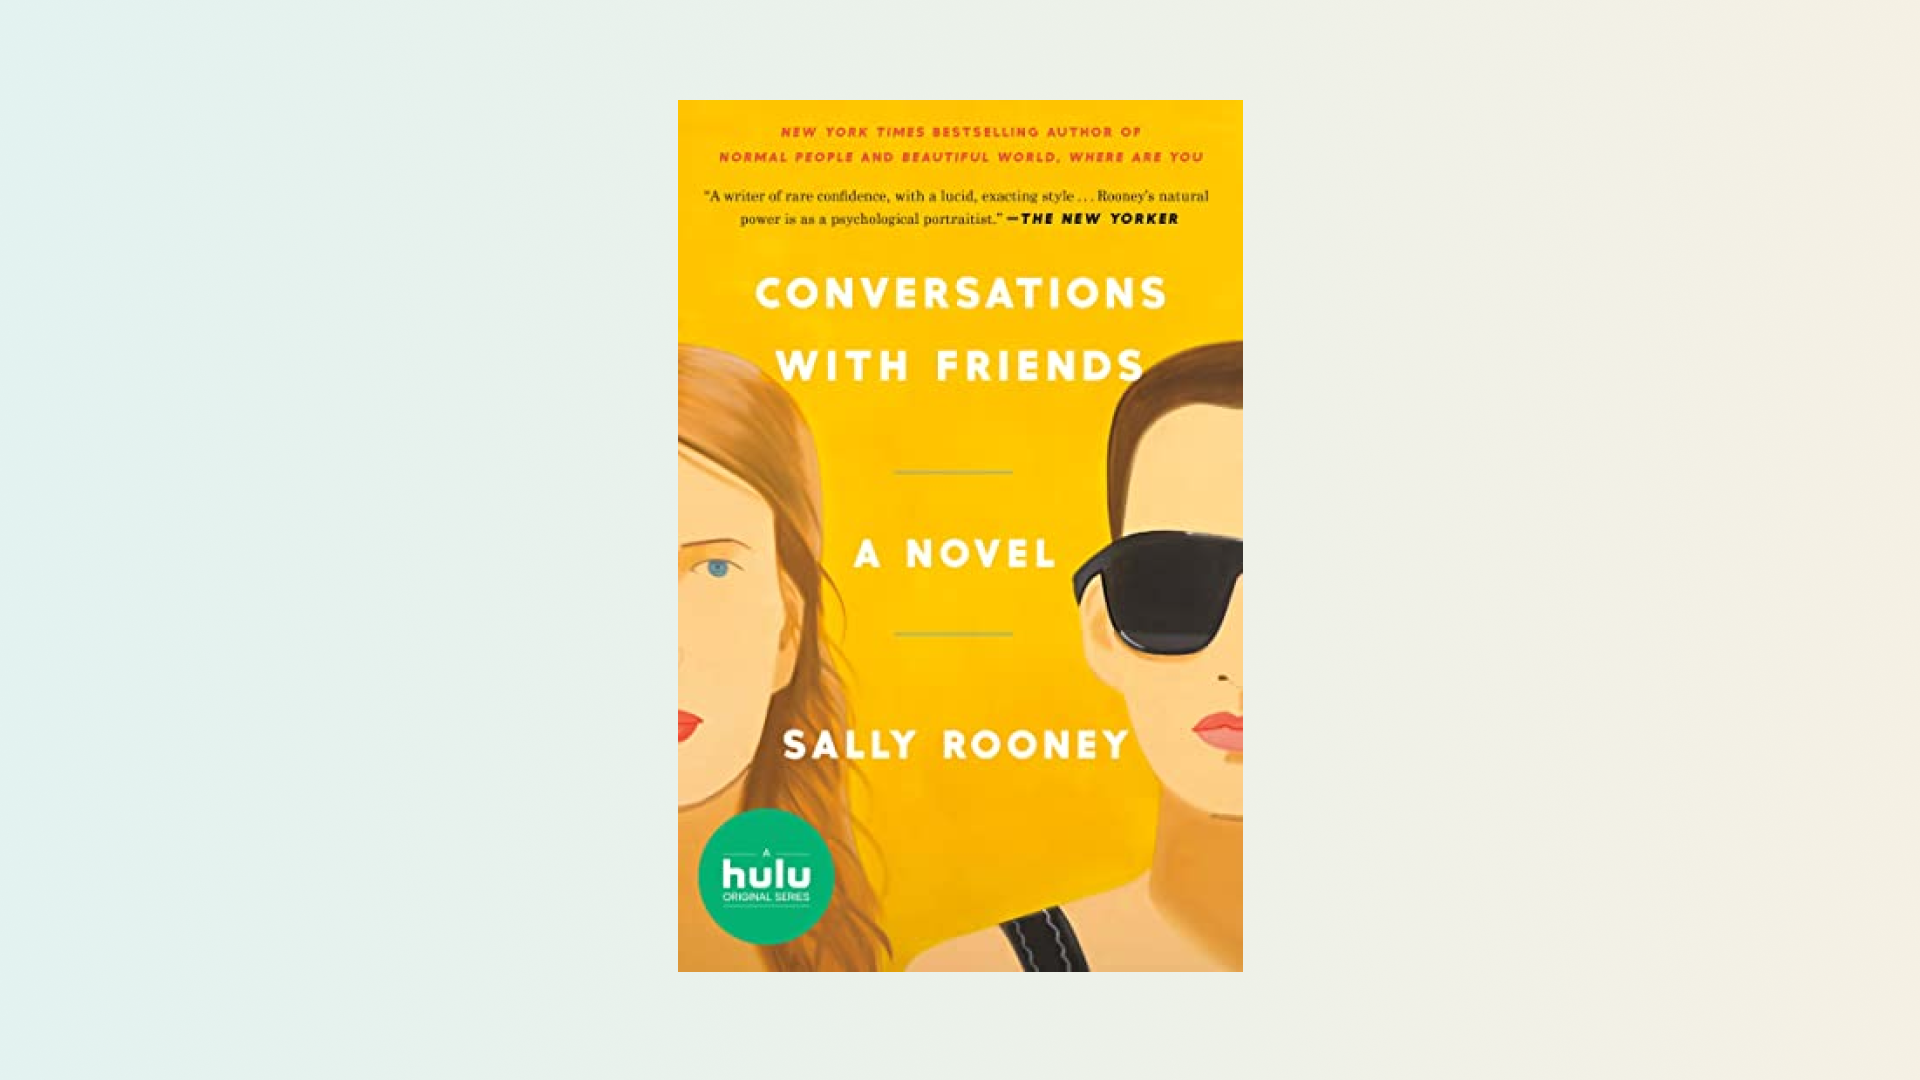 “Conversations with Friends” by Sally Rooney